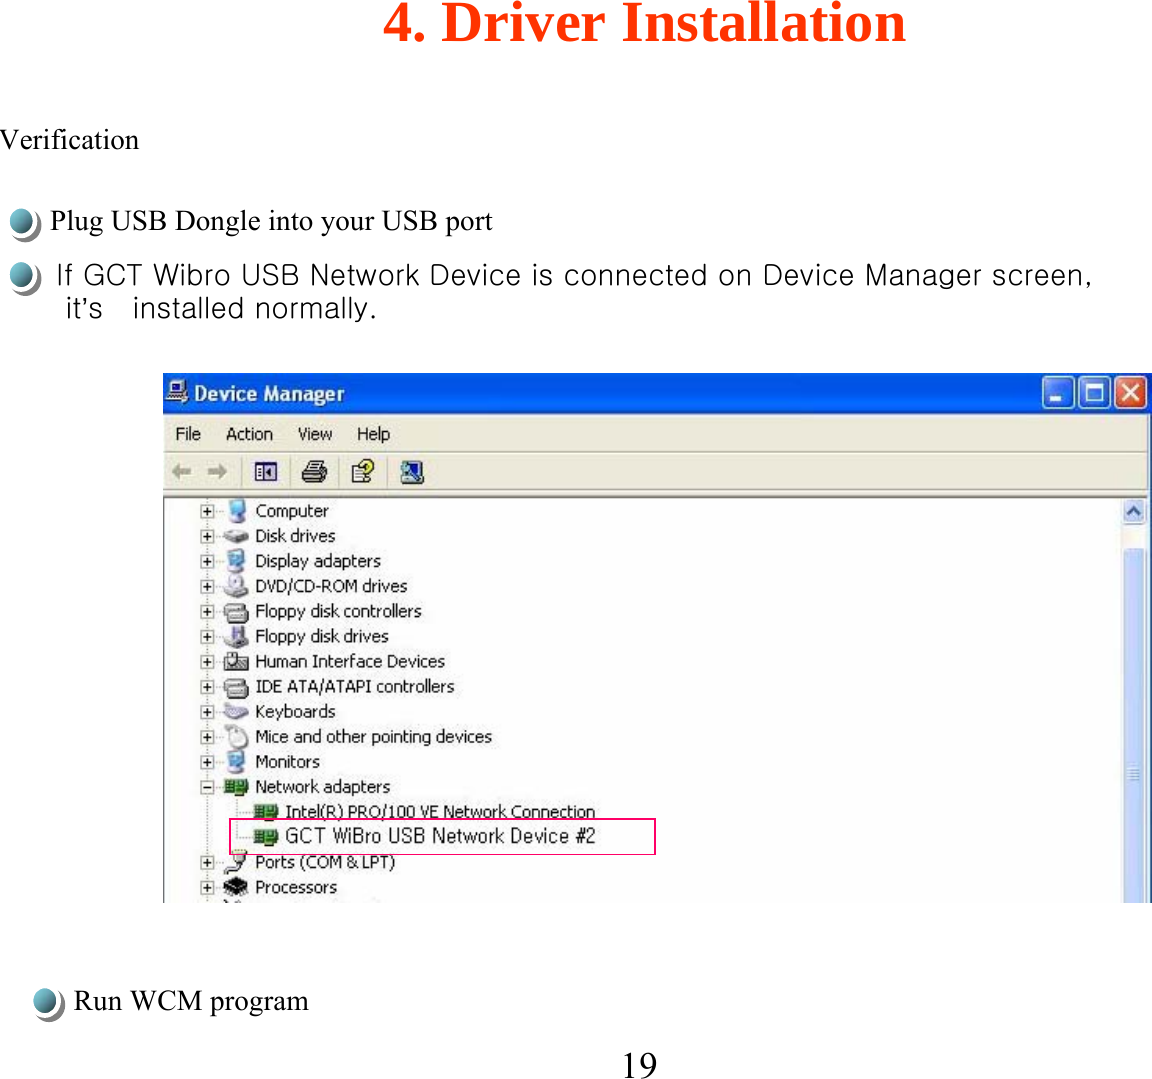 194. Driver InstallationIf GCT Wibro USB Network Device is connected on Device Manager screen, it’s   installed normally.VerificationPlug USB Dongle into your USB portRun WCM program